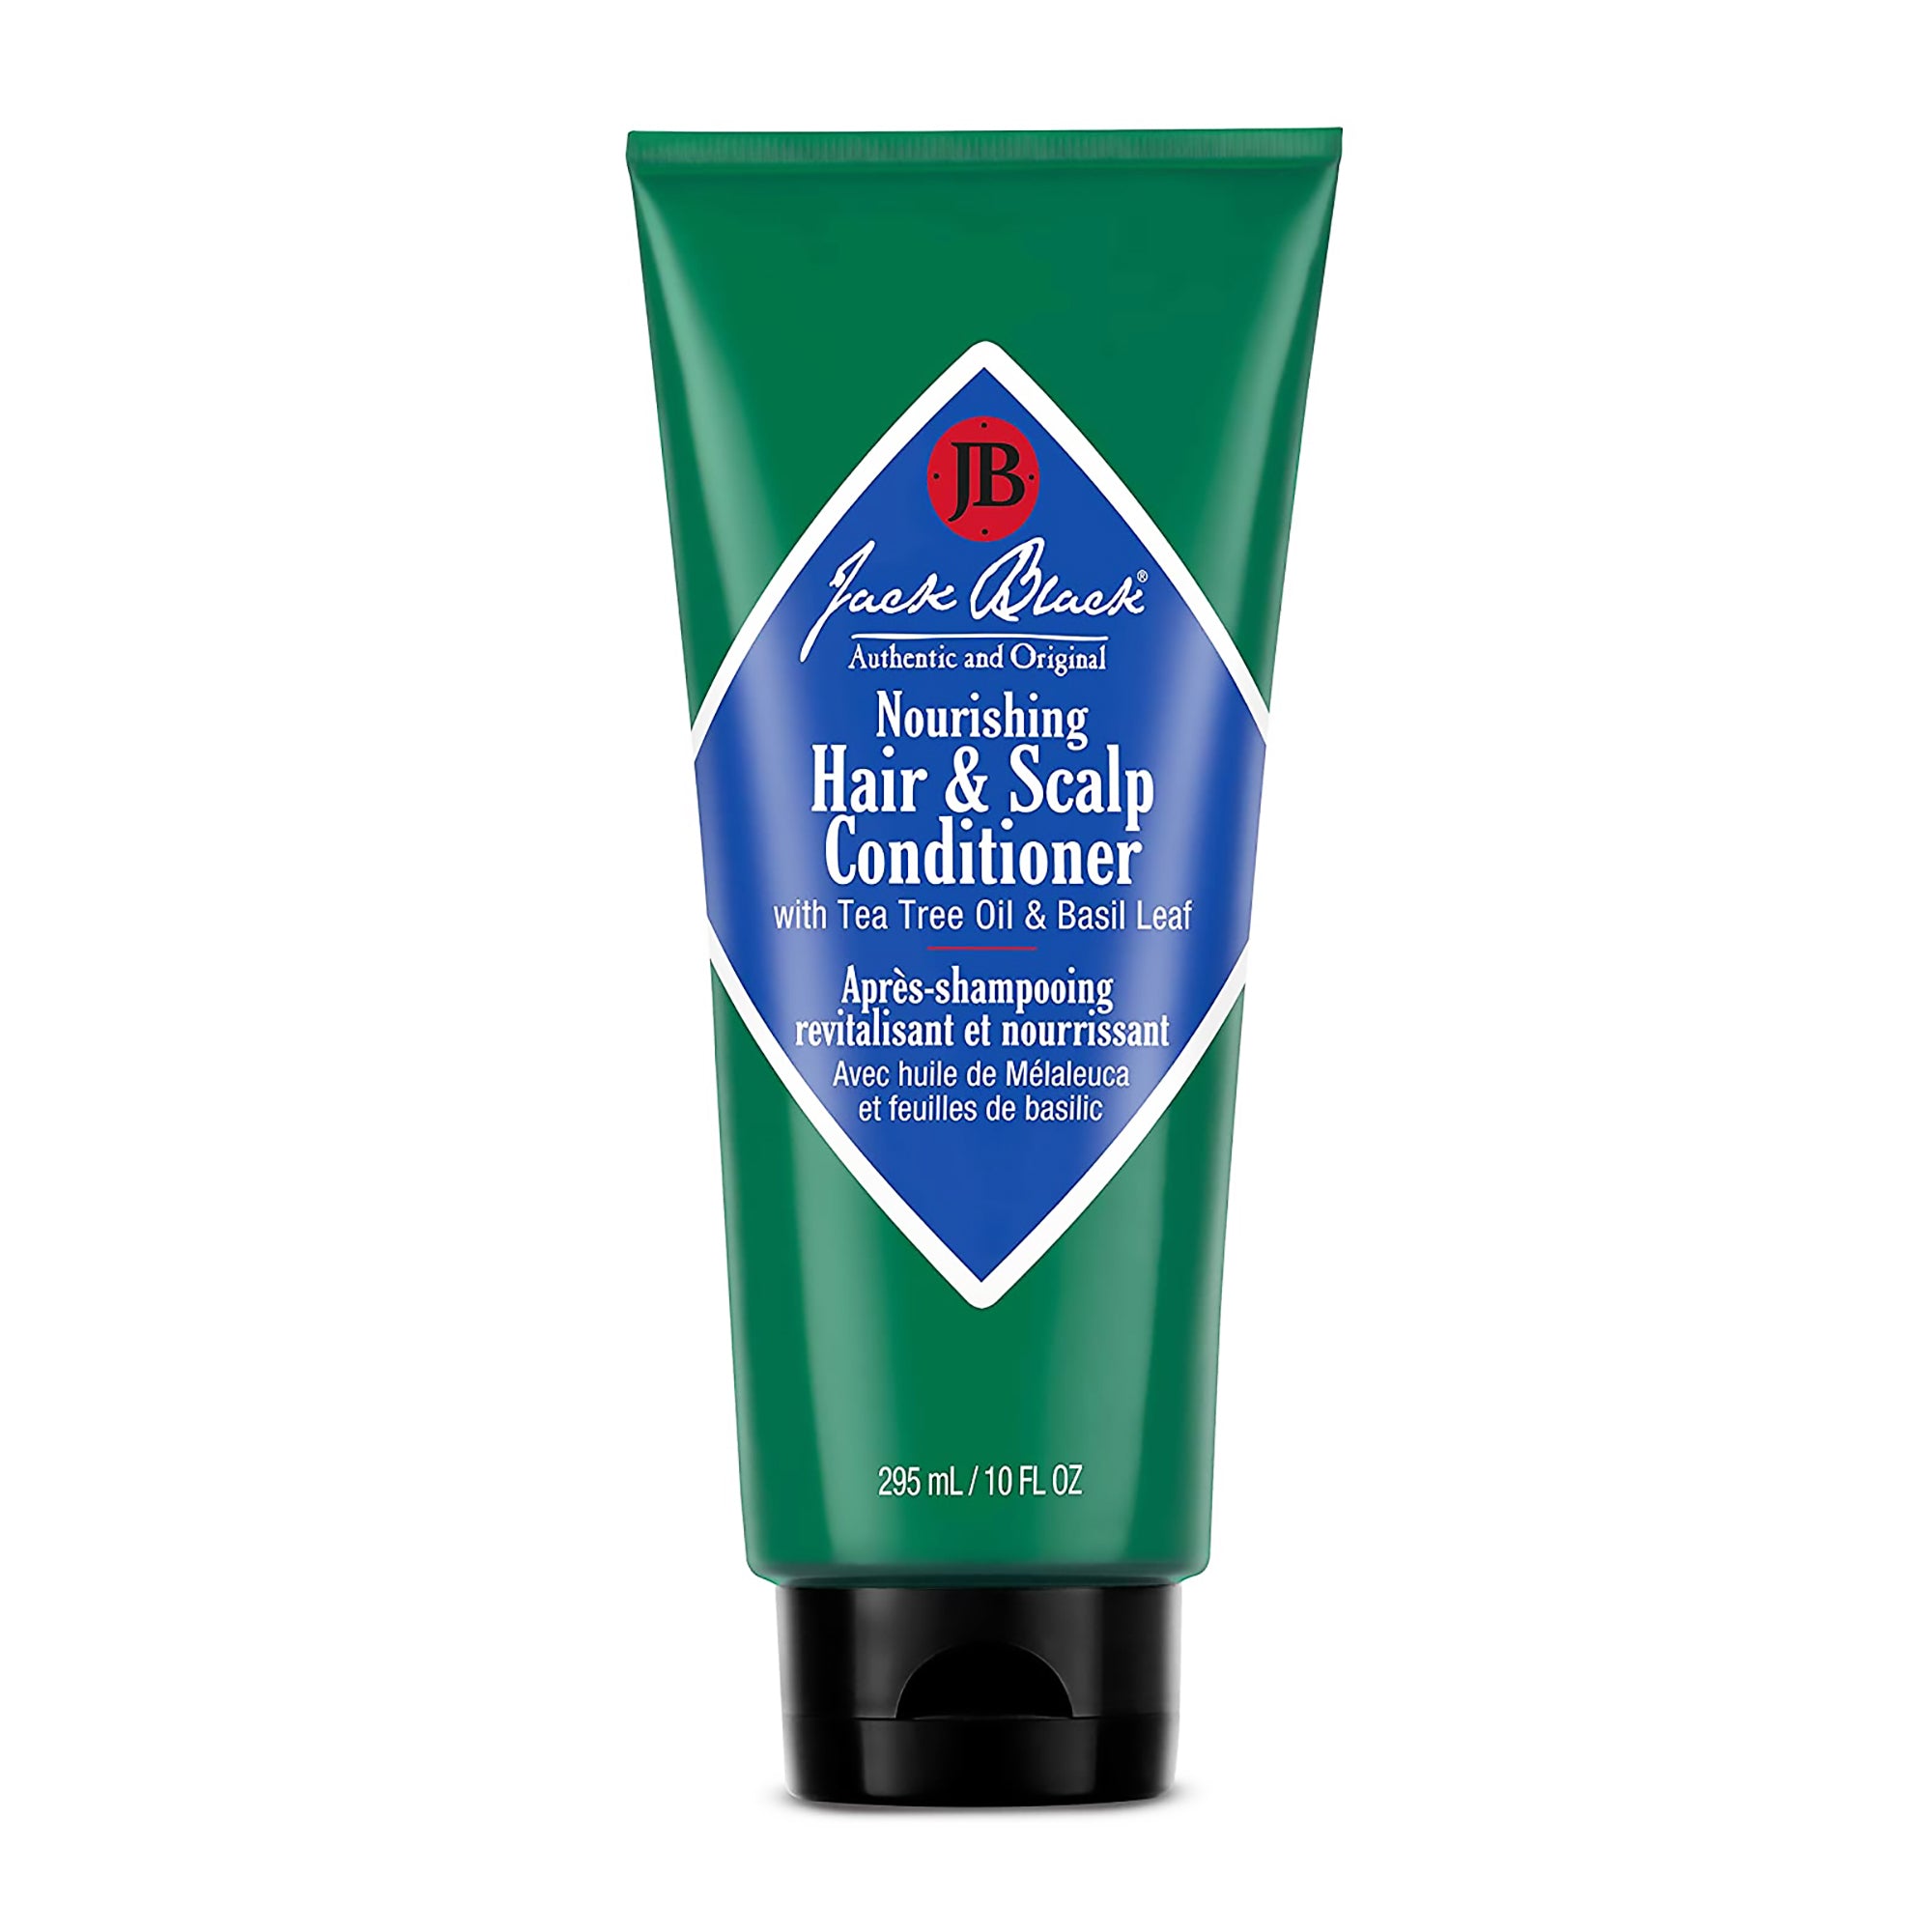 Jack Black Nourishing Hair And Scalp Conditioner with Tea Tree Oil & Basil Leaf / 10OZ